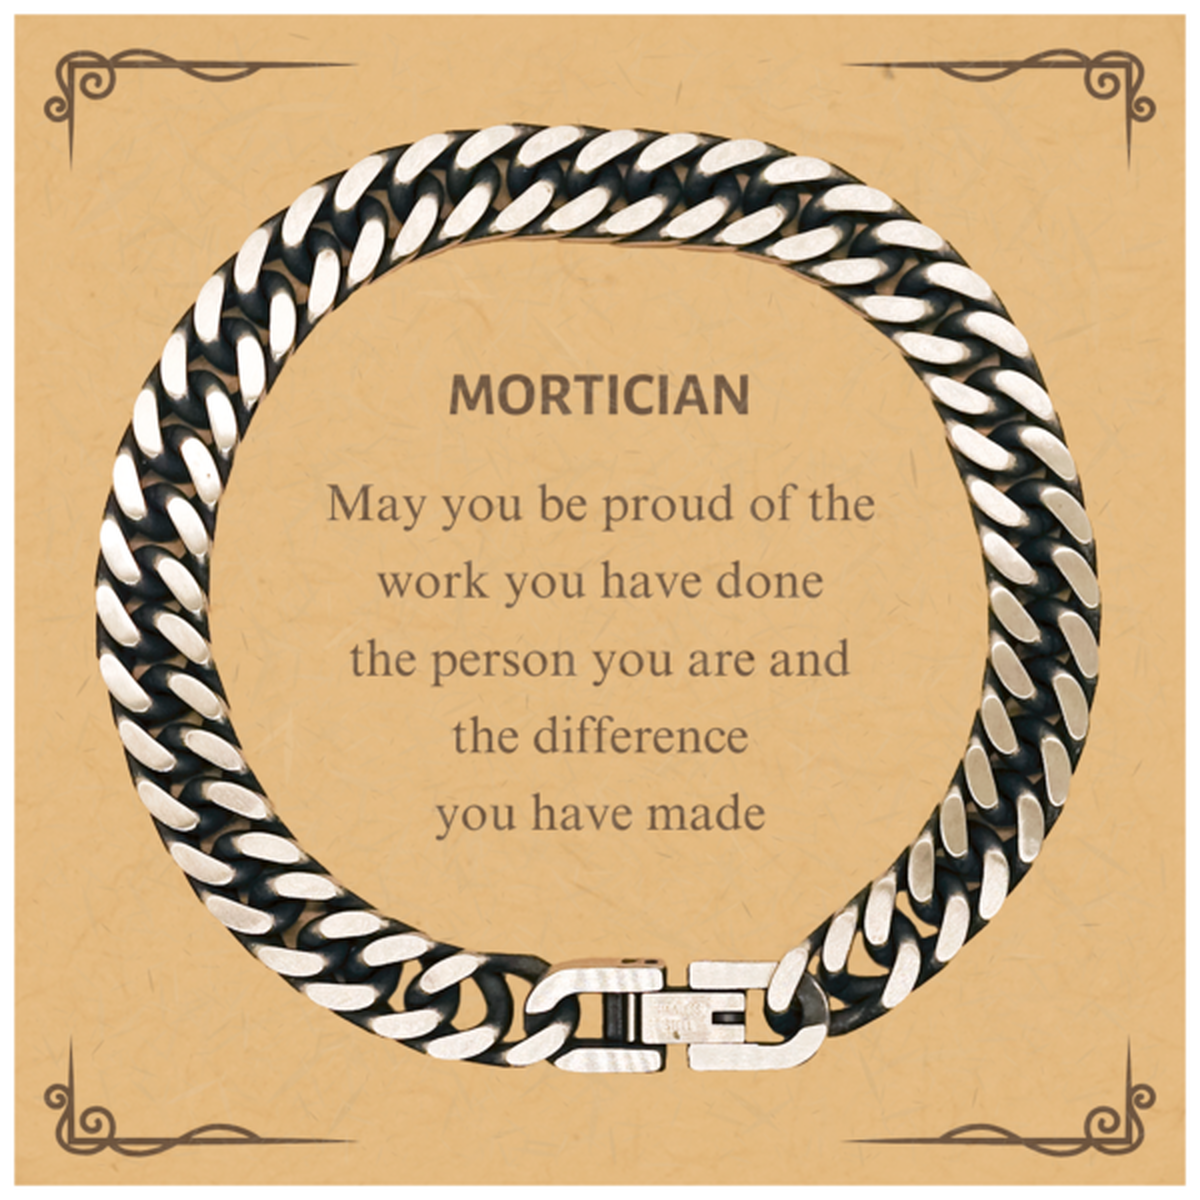 Mortician May you be proud of the work you have done, Retirement Mortician Cuban Link Chain Bracelet for Colleague Appreciation Gifts Amazing for Mortician